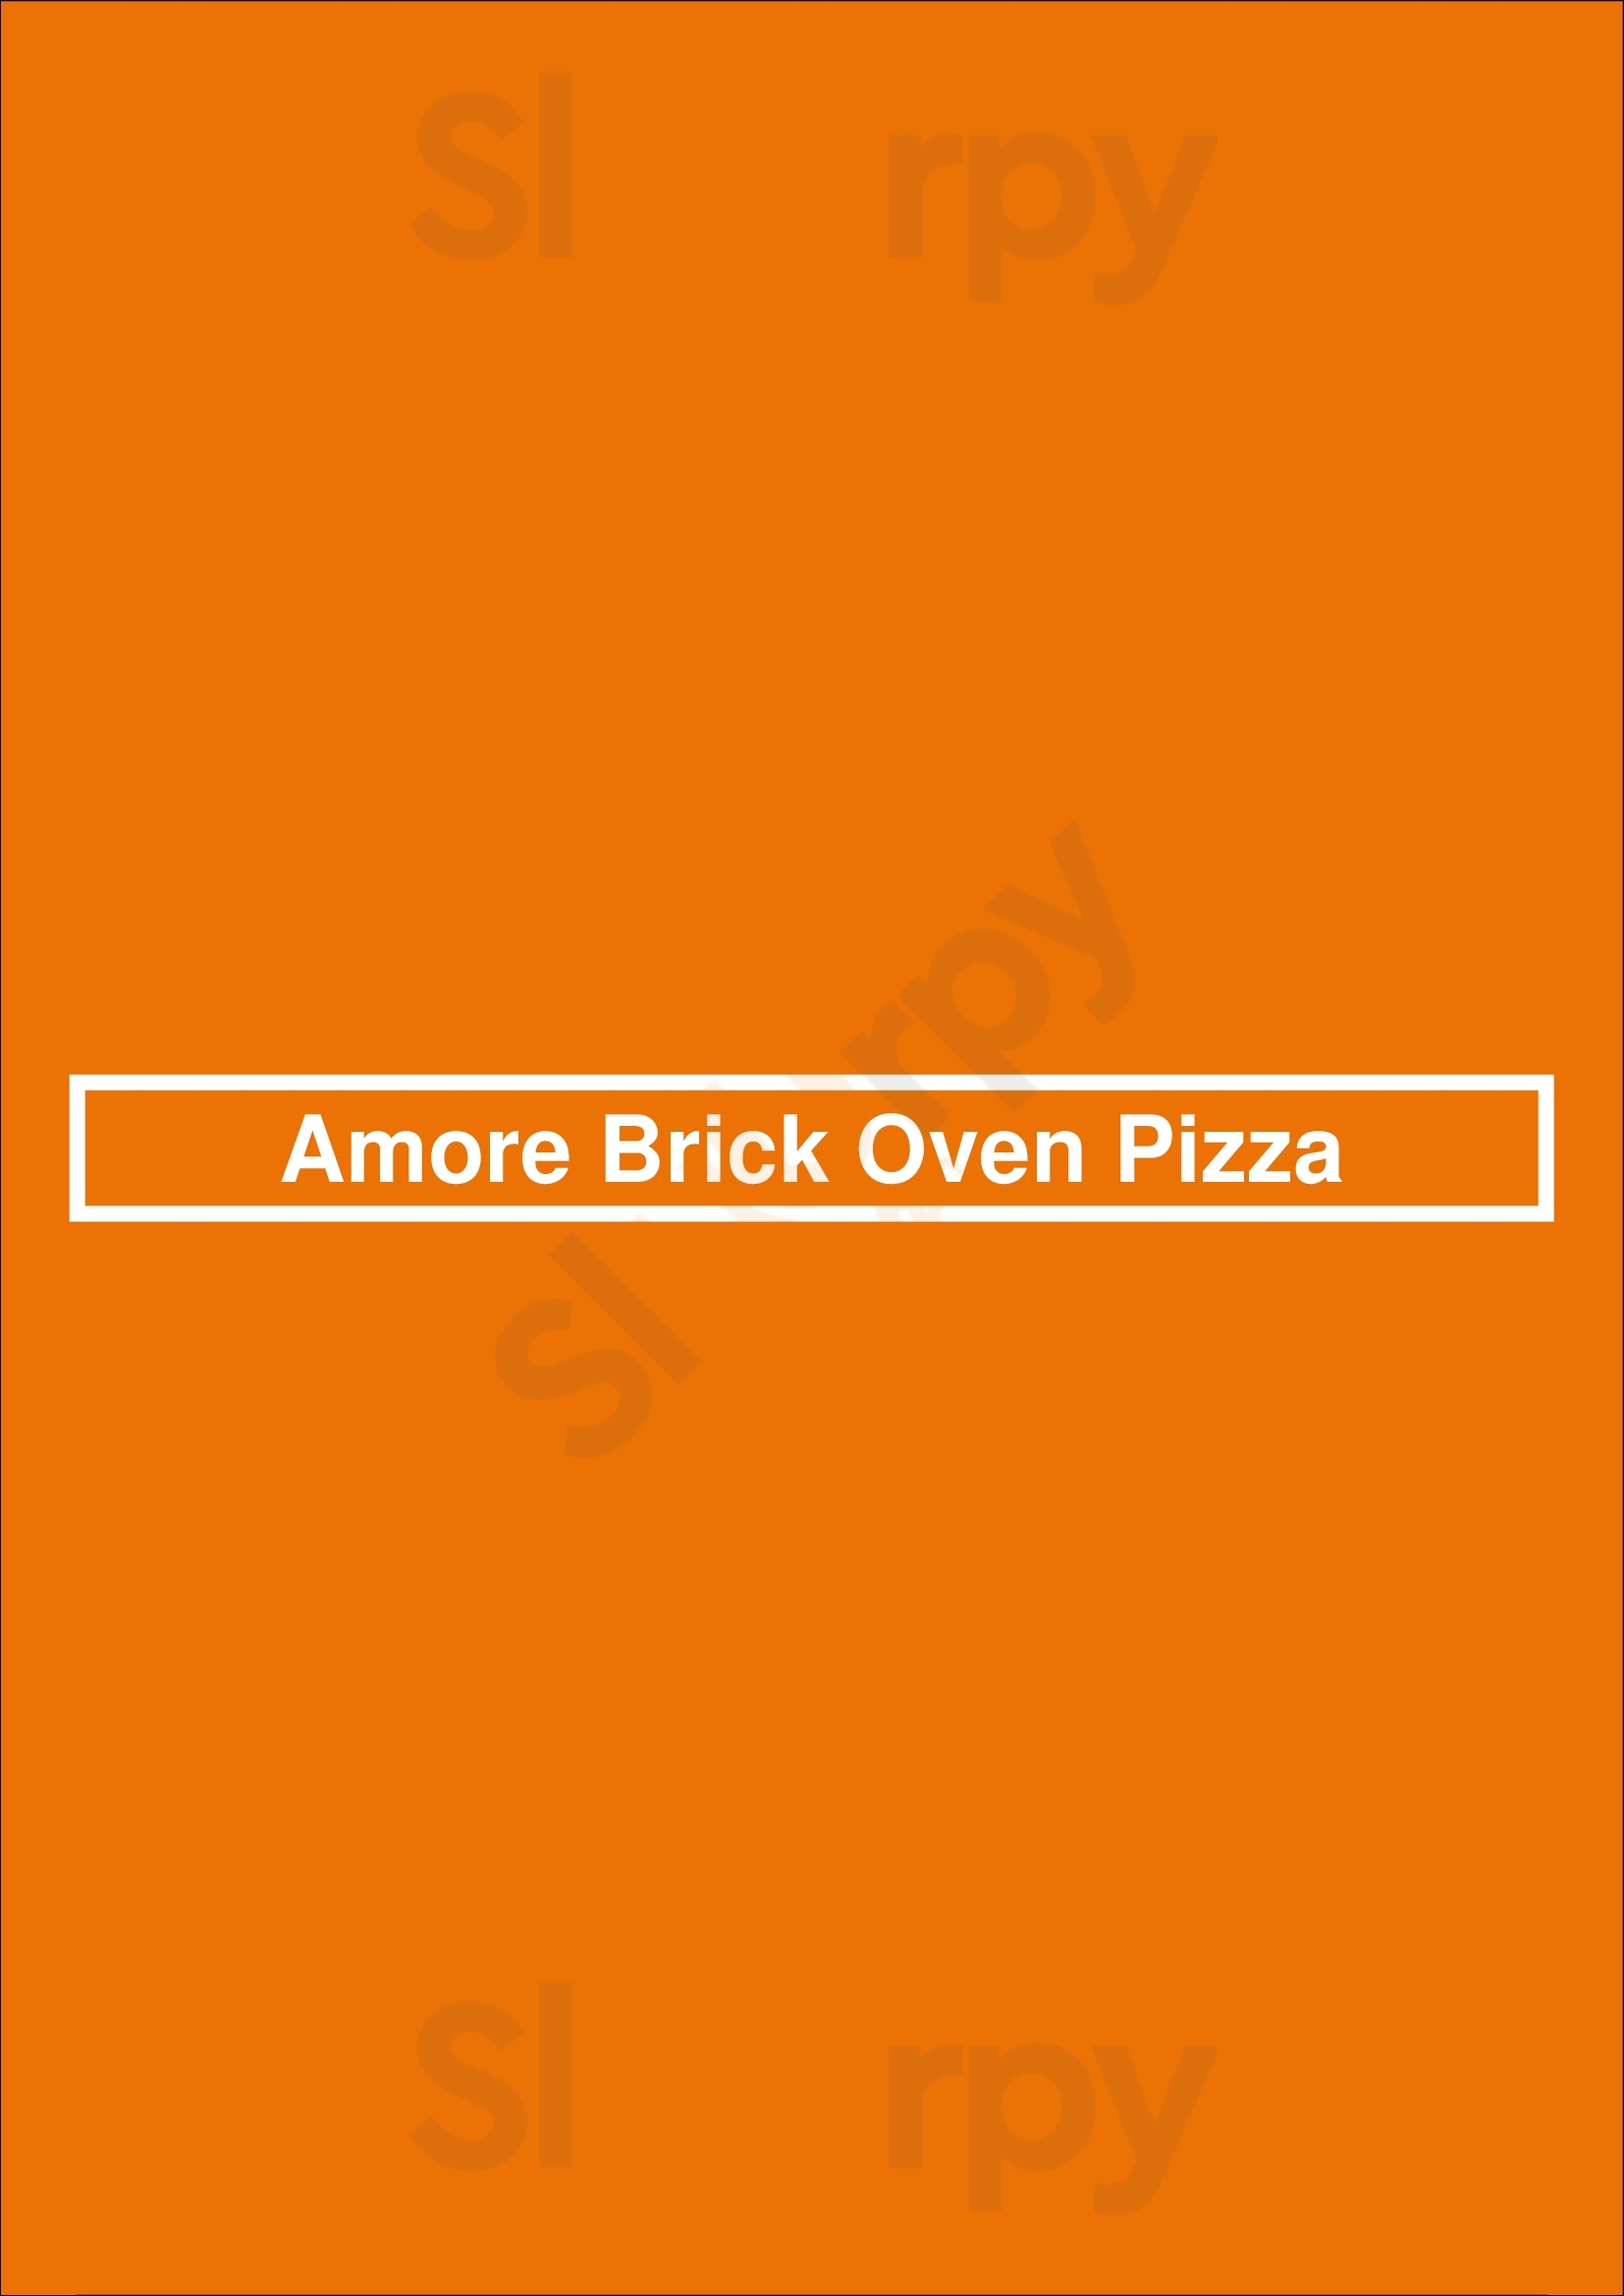 Amore Brick Oven Pizza Fort Myers Menu - 1